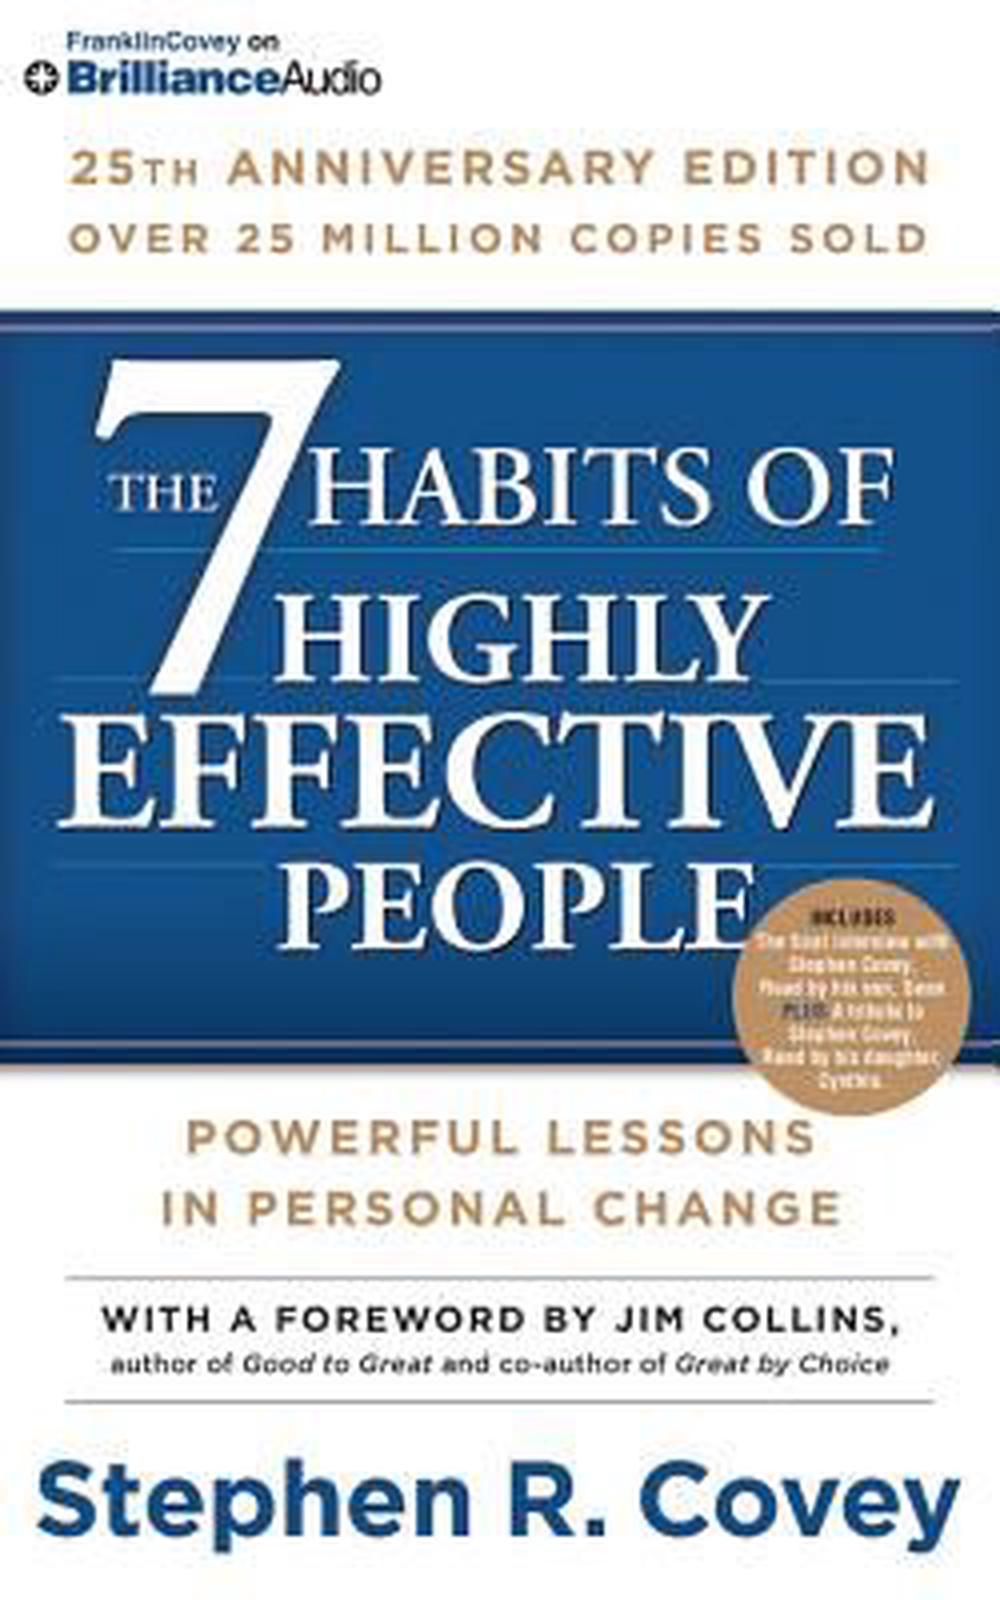 The habits of 7 highly effective people by Stephen R. Covey